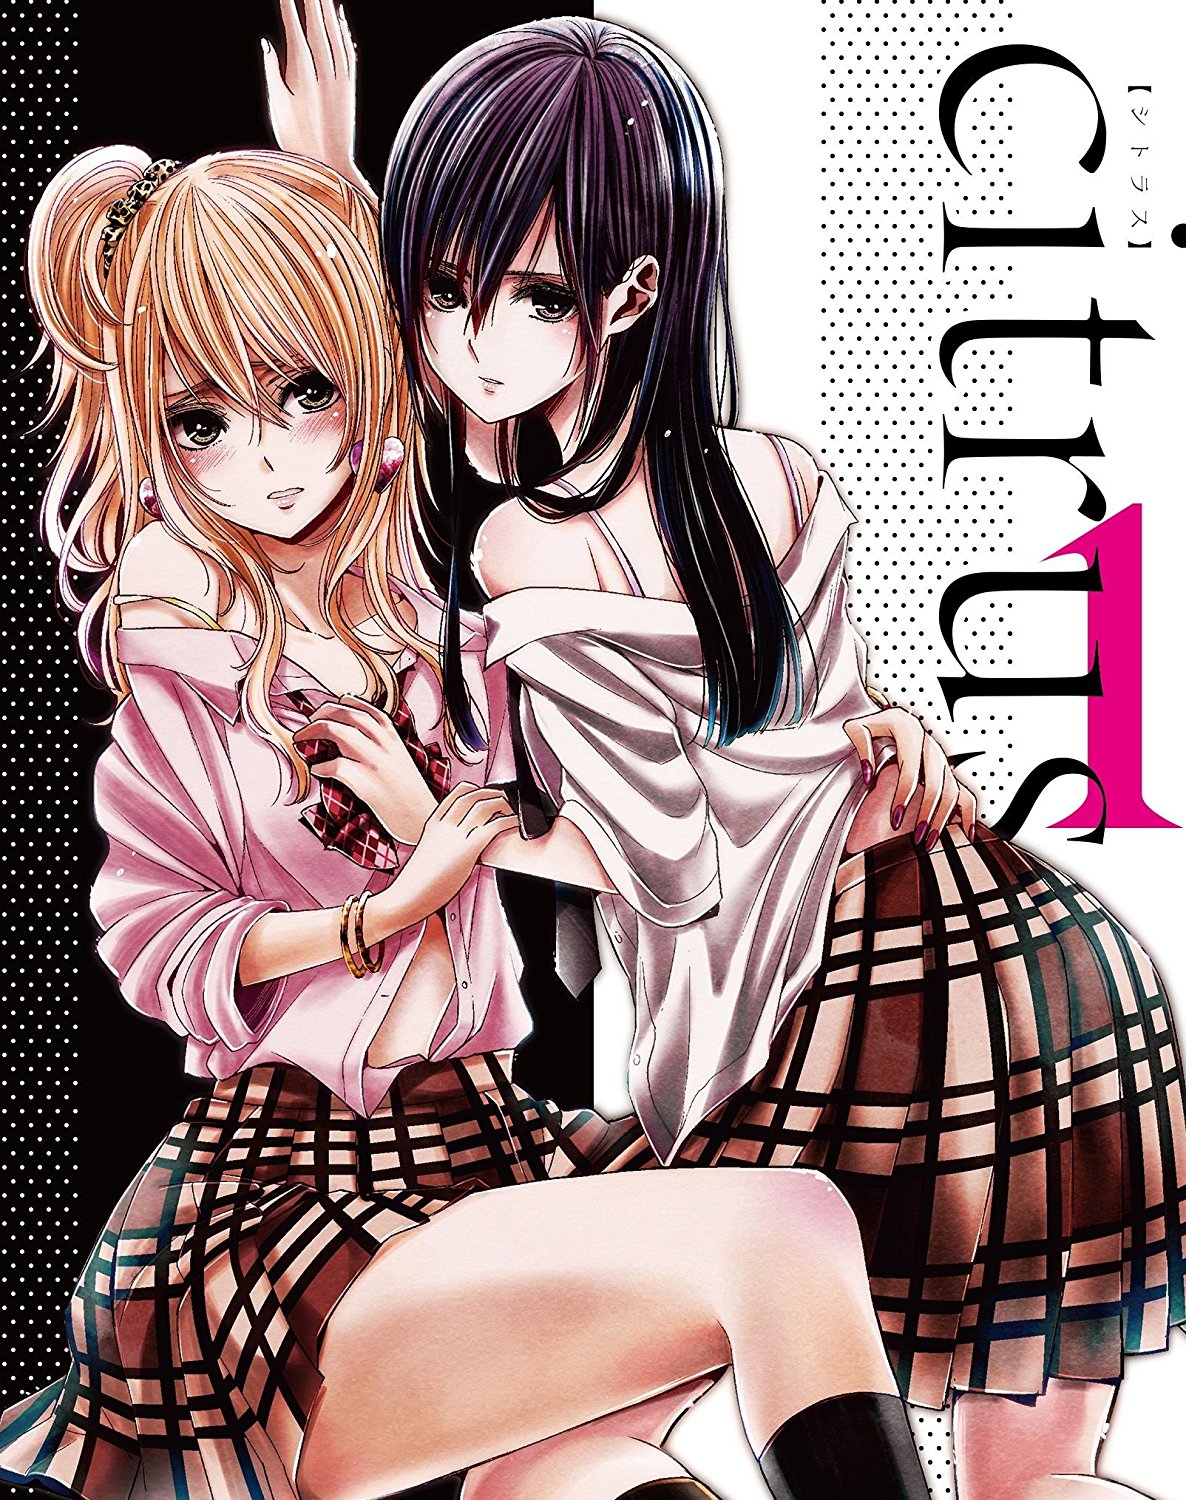 Is Citrus as bad as the community marks it to be?